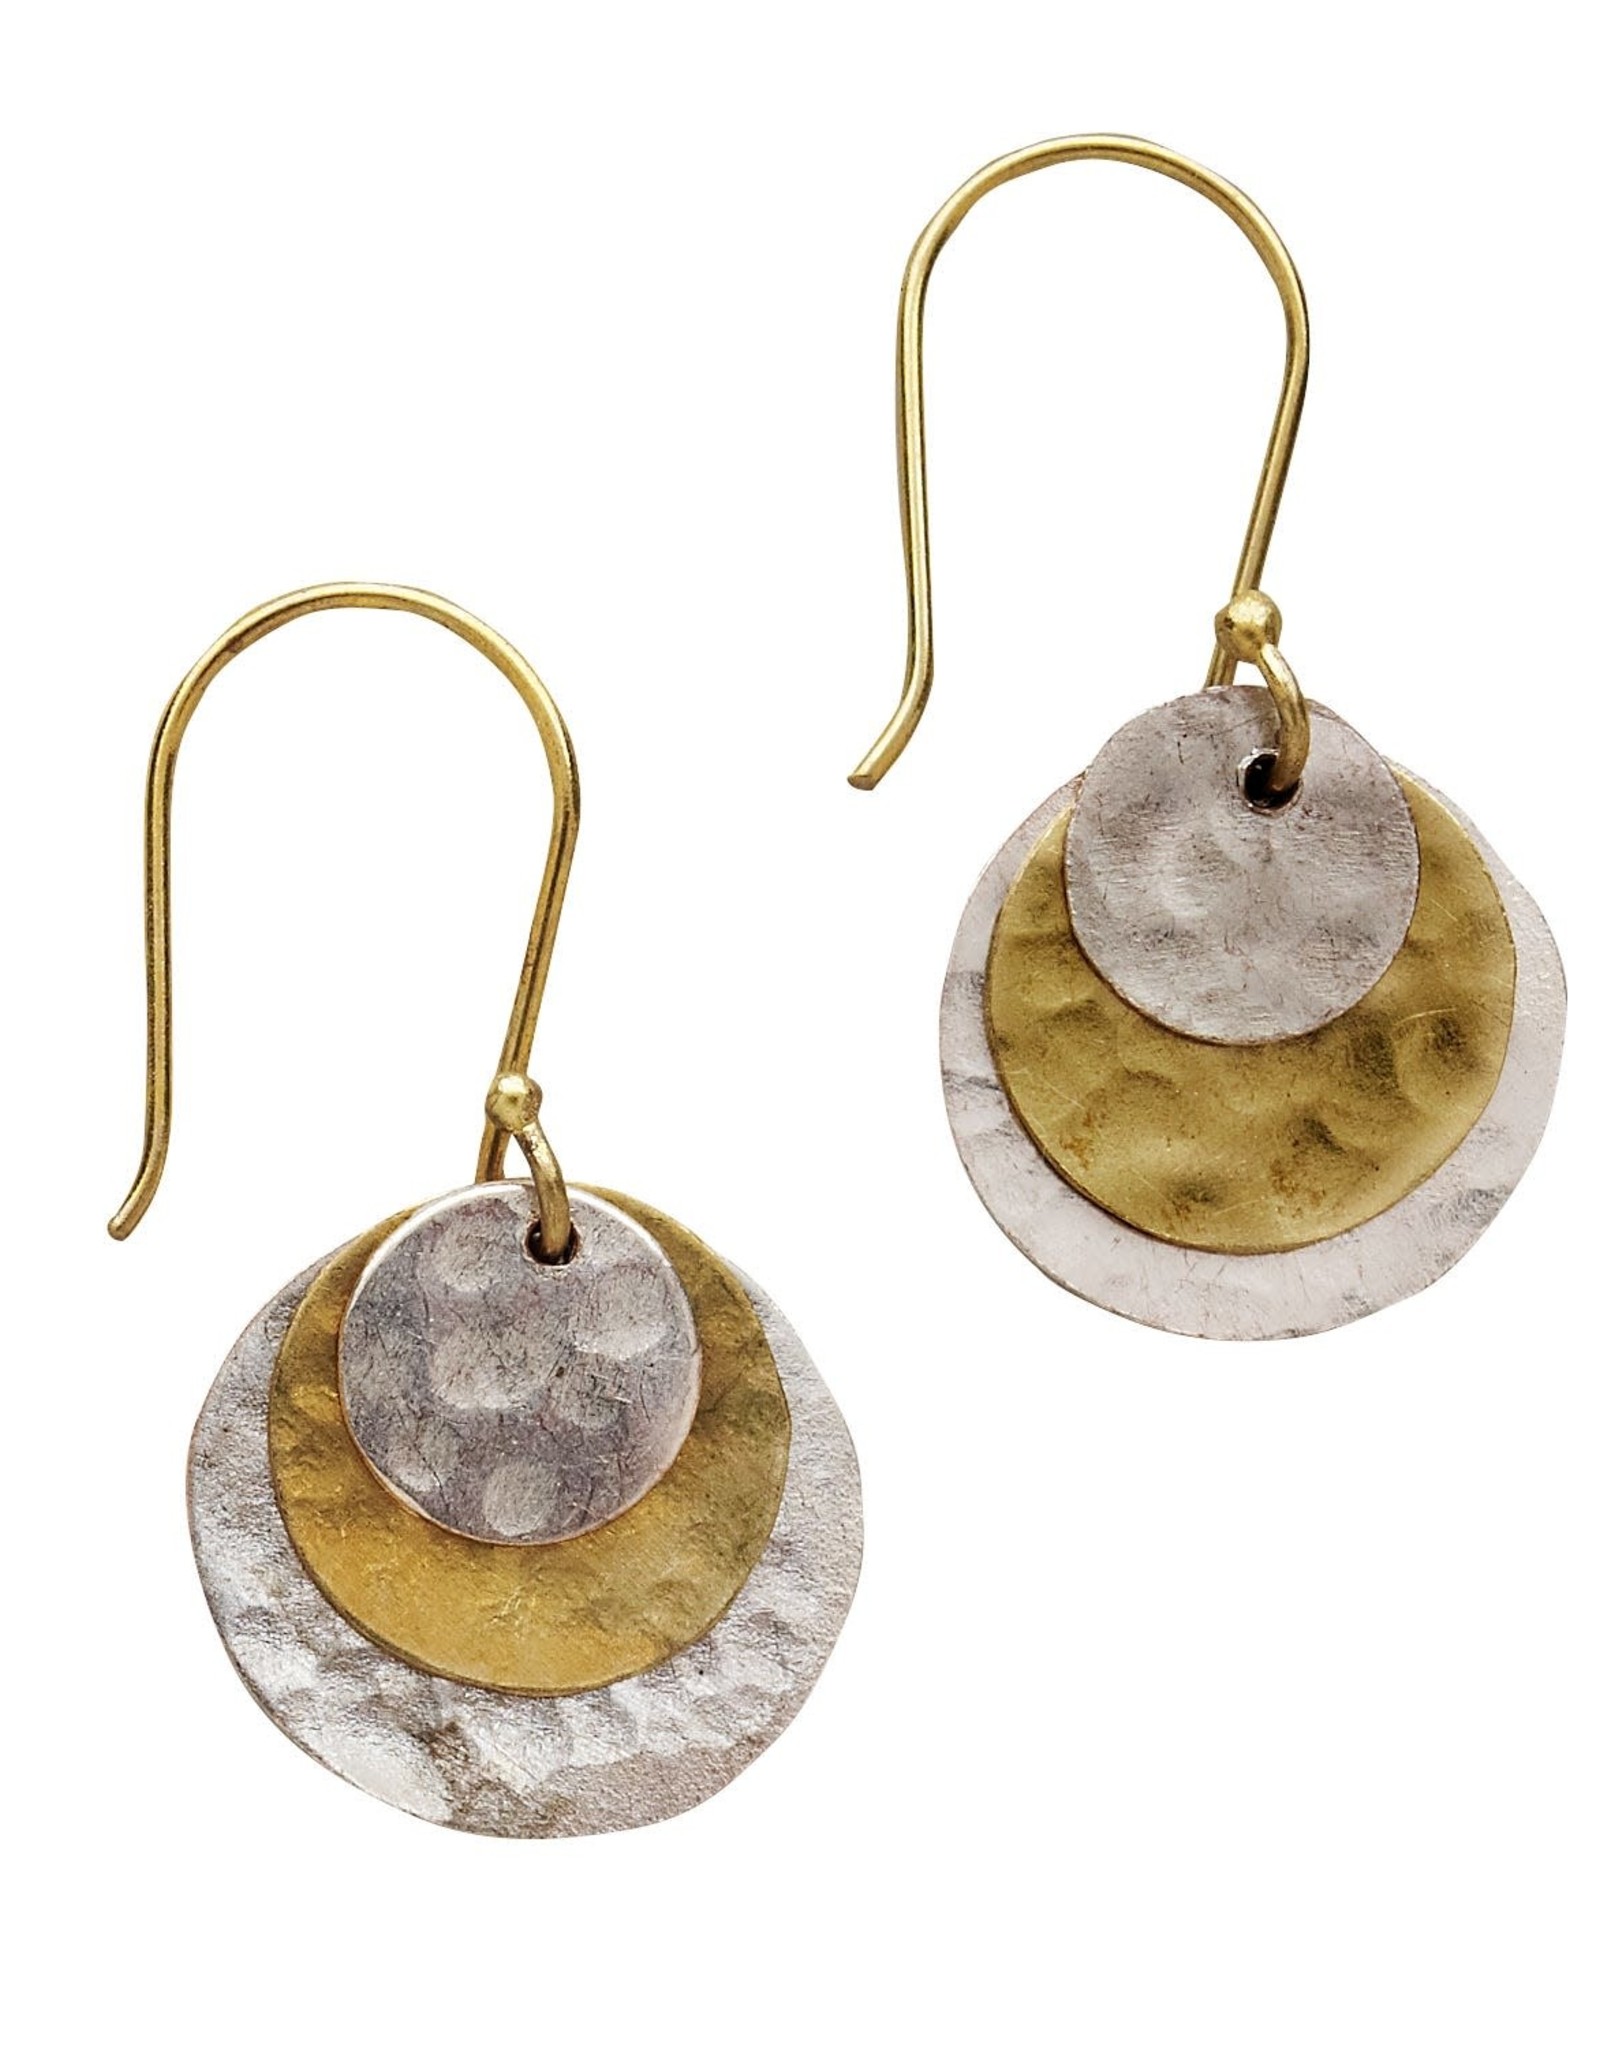 Ten Thousand Villages Native Riches Earrings